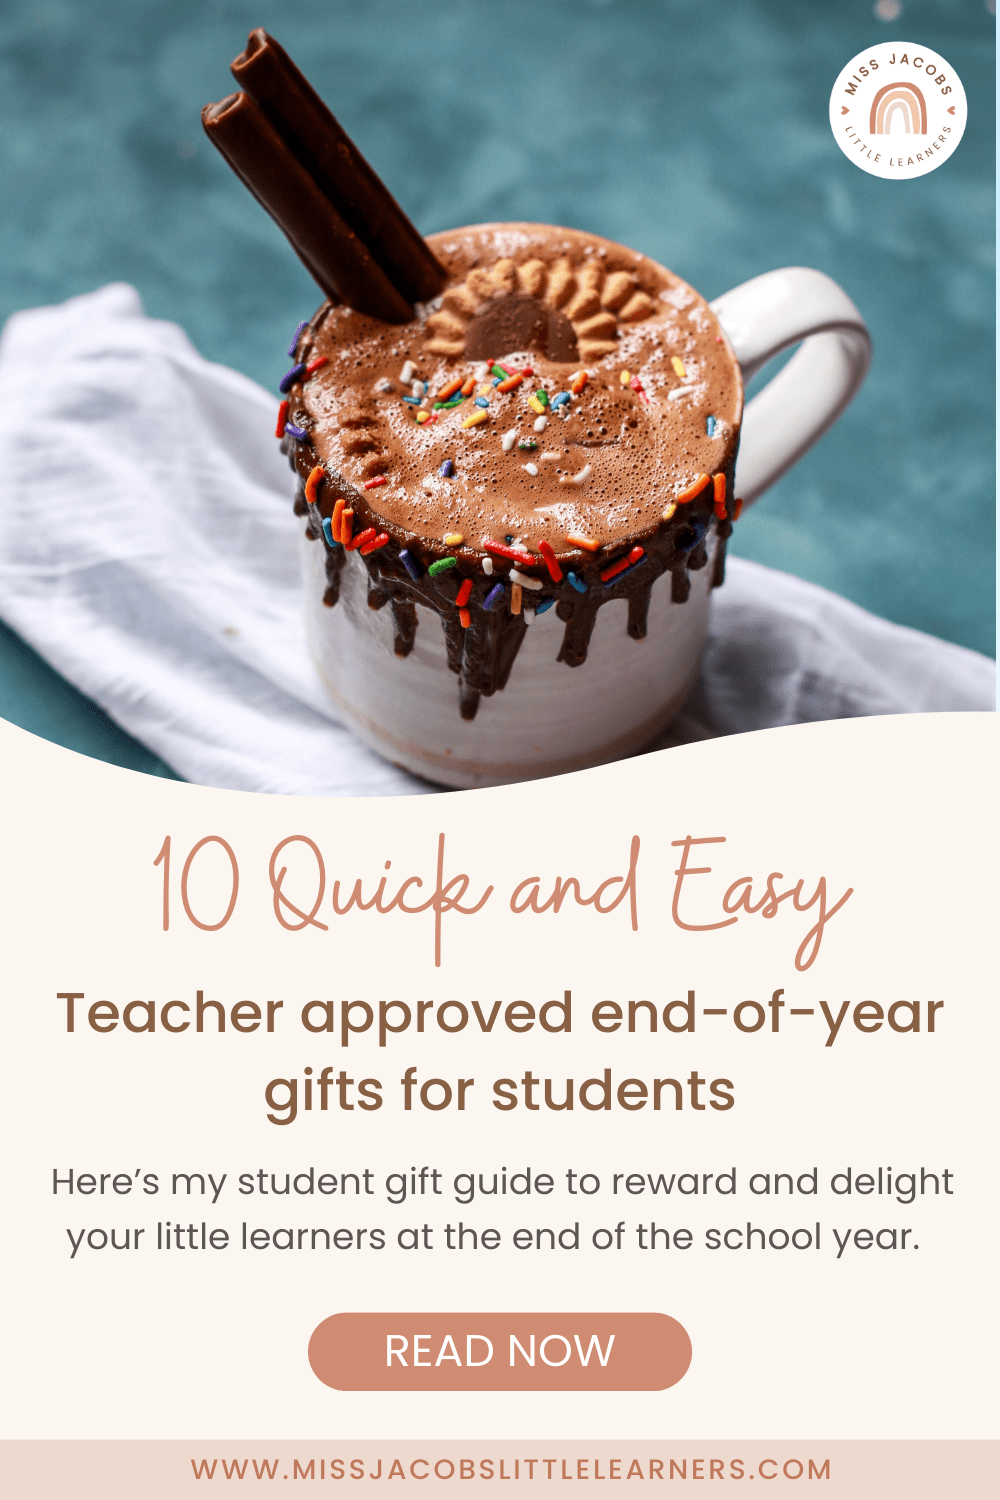 End of Year Gift Ideas for Students - Sweet Tooth Teaching